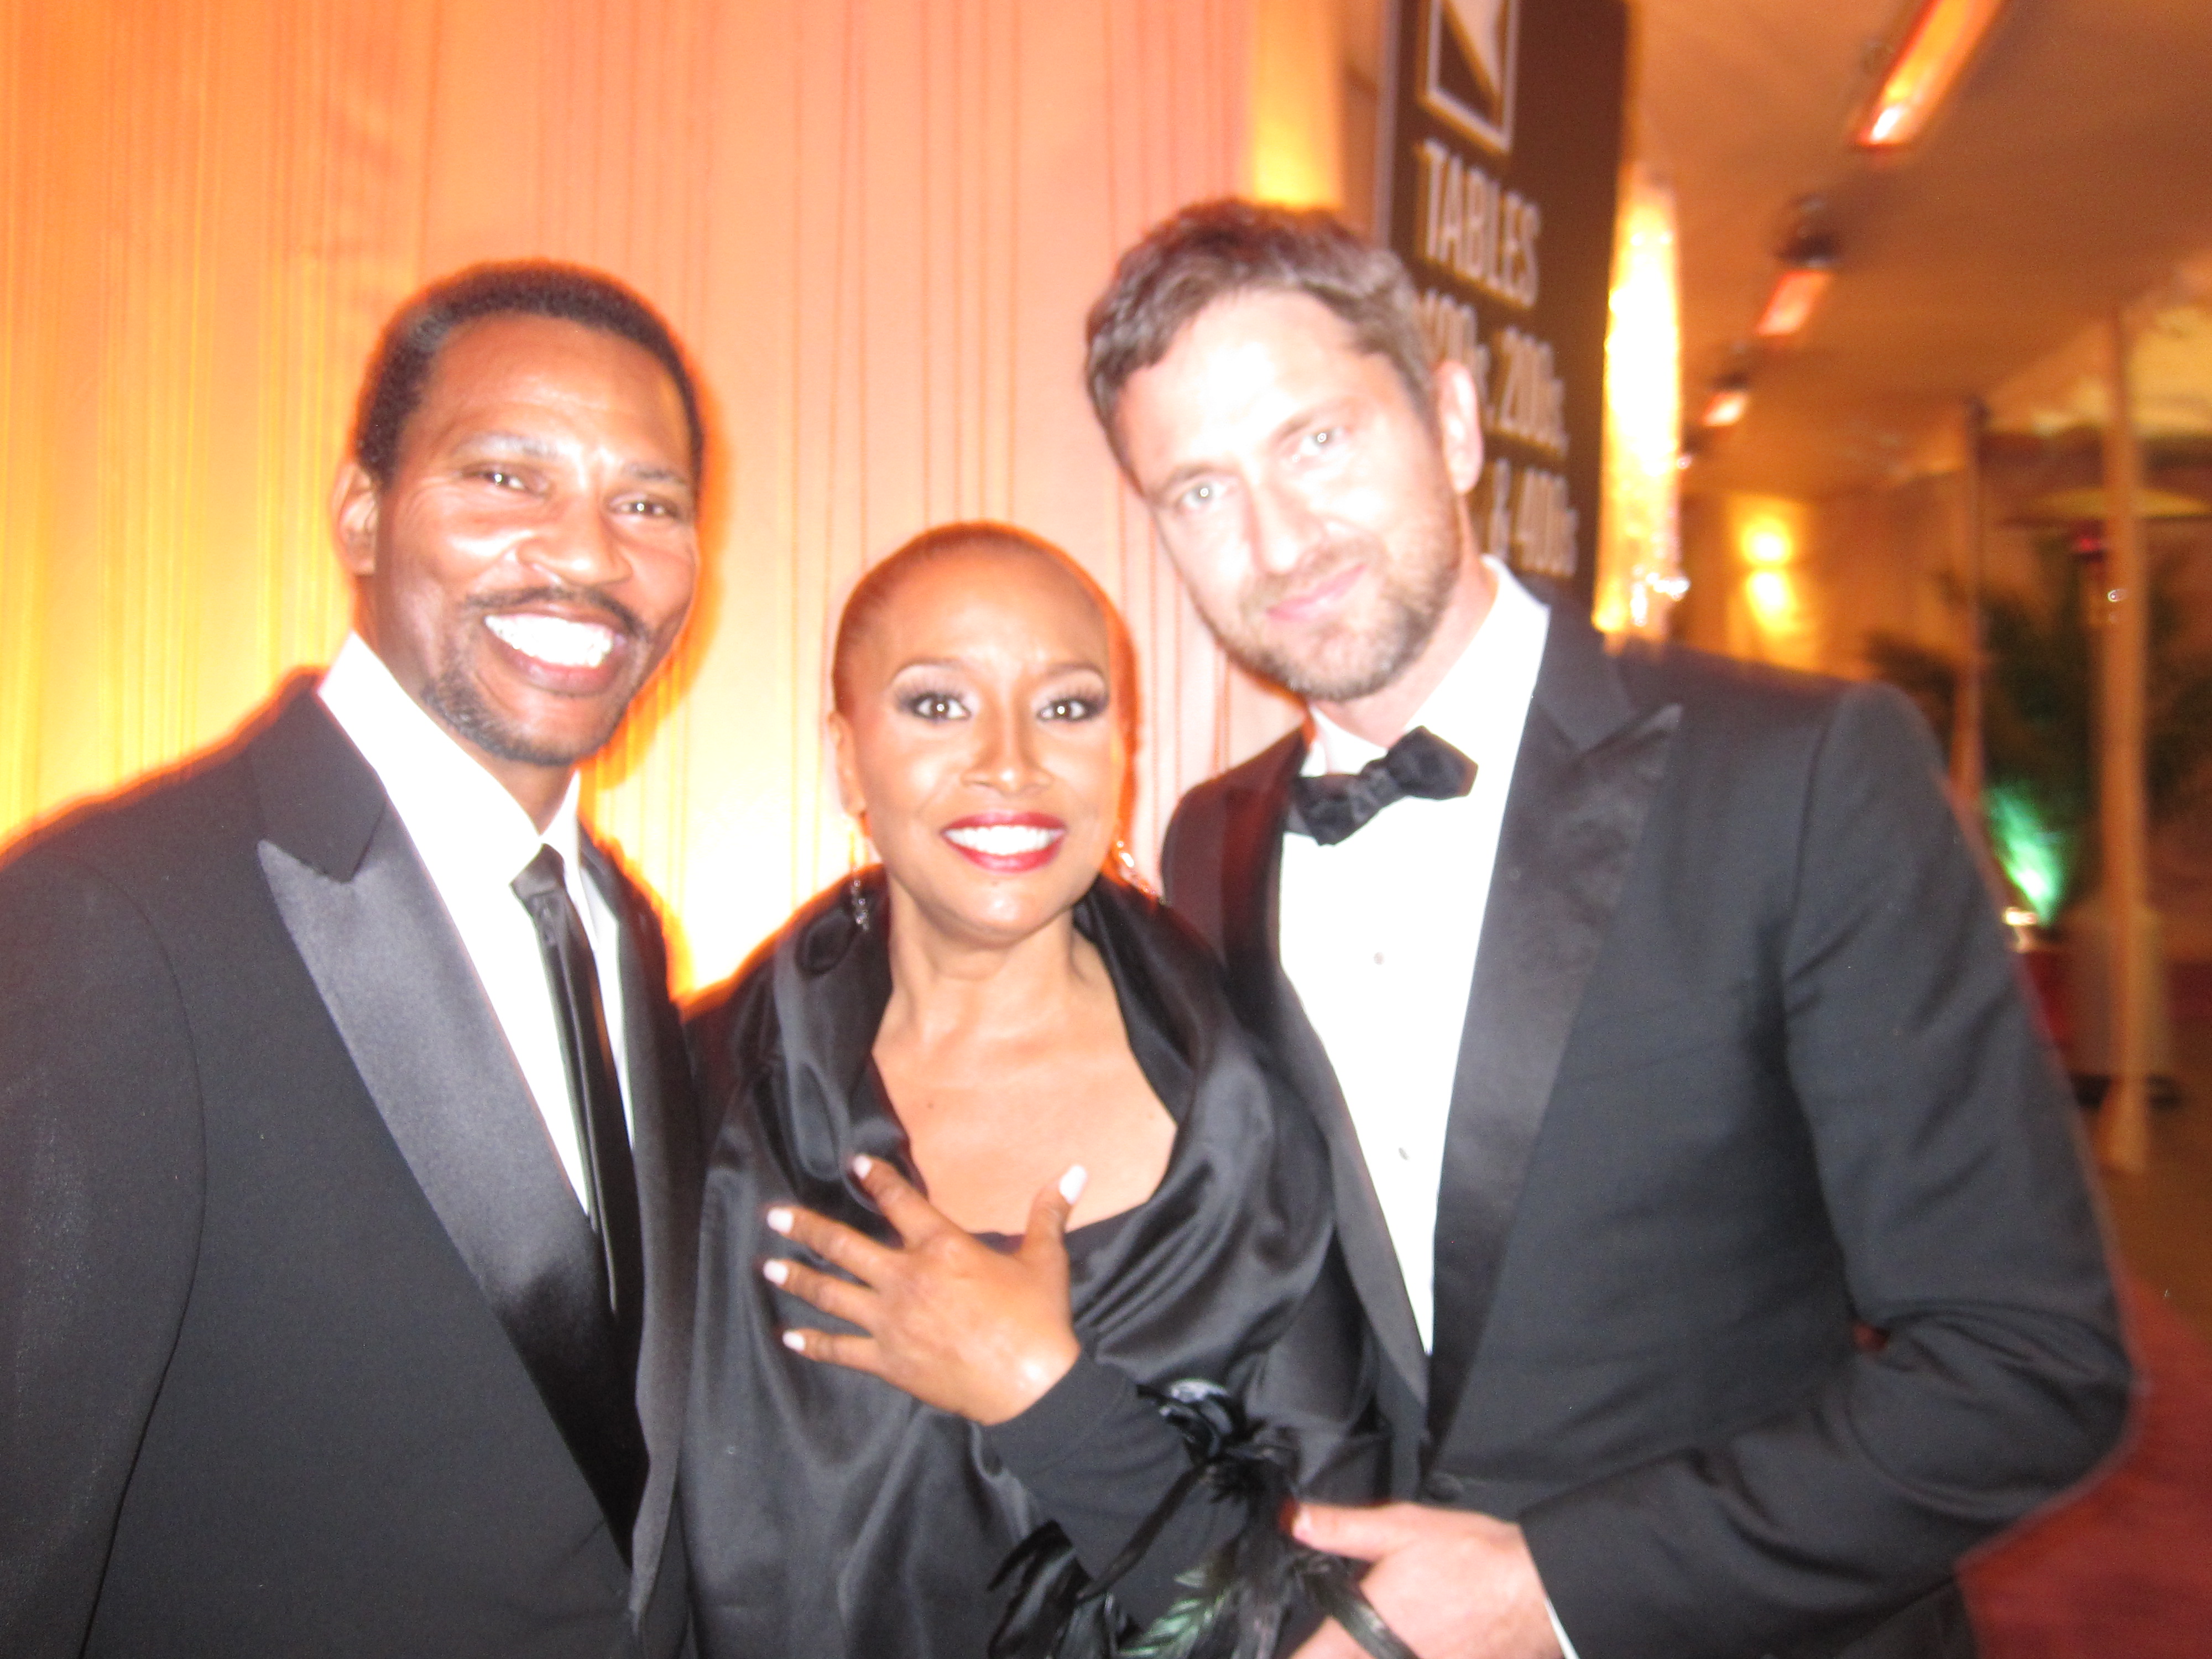 Jenifer Lewis and Arnold Byrd with Gerard Butler at the 2010 Academy Awards ceremony in Los Angeles, California.